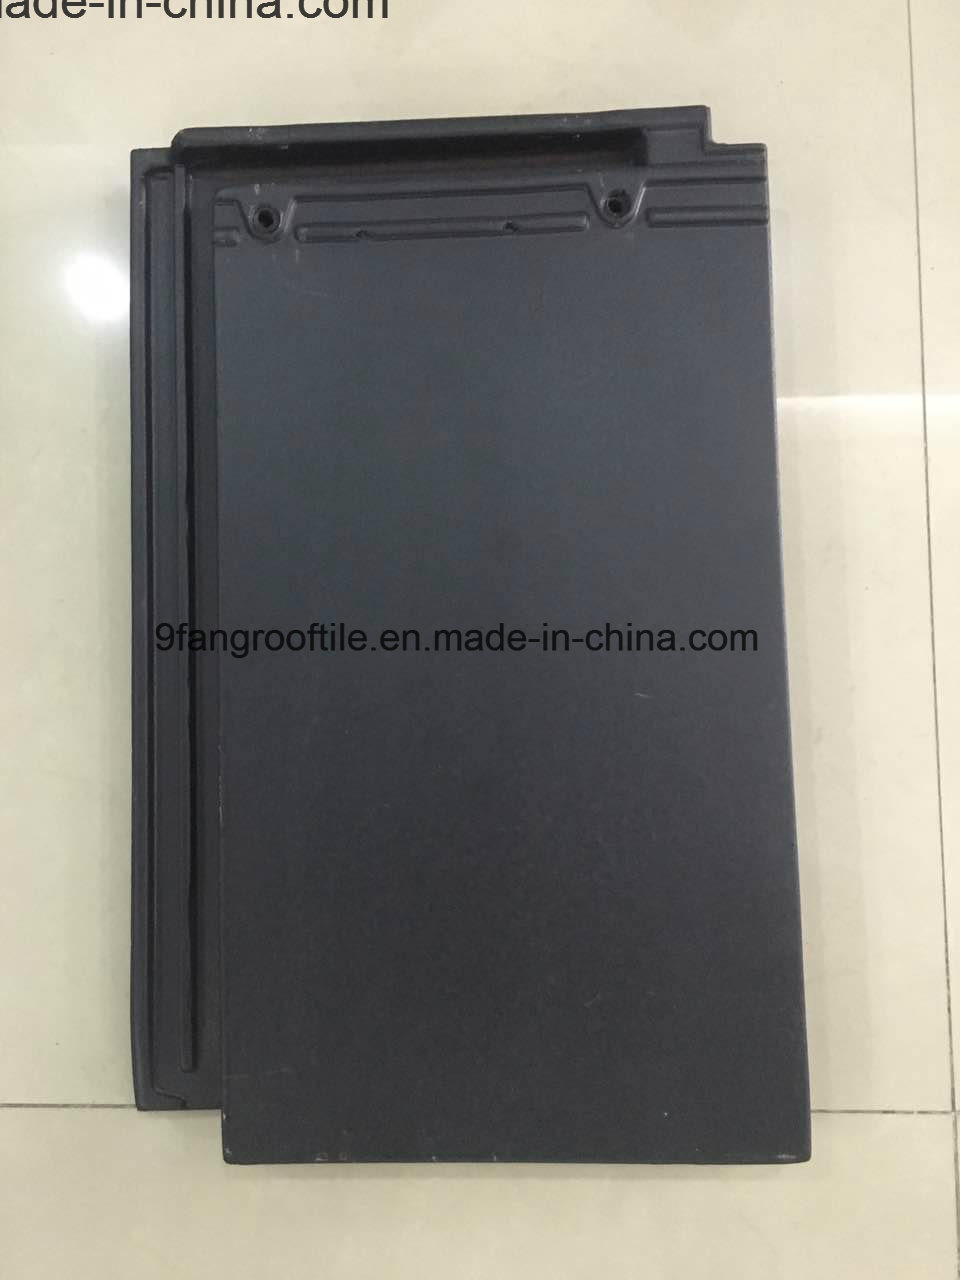 Clay Tile Building Meterail Clay Flat Roof Tile 290*450mm Factory Supplier Guangdong, China